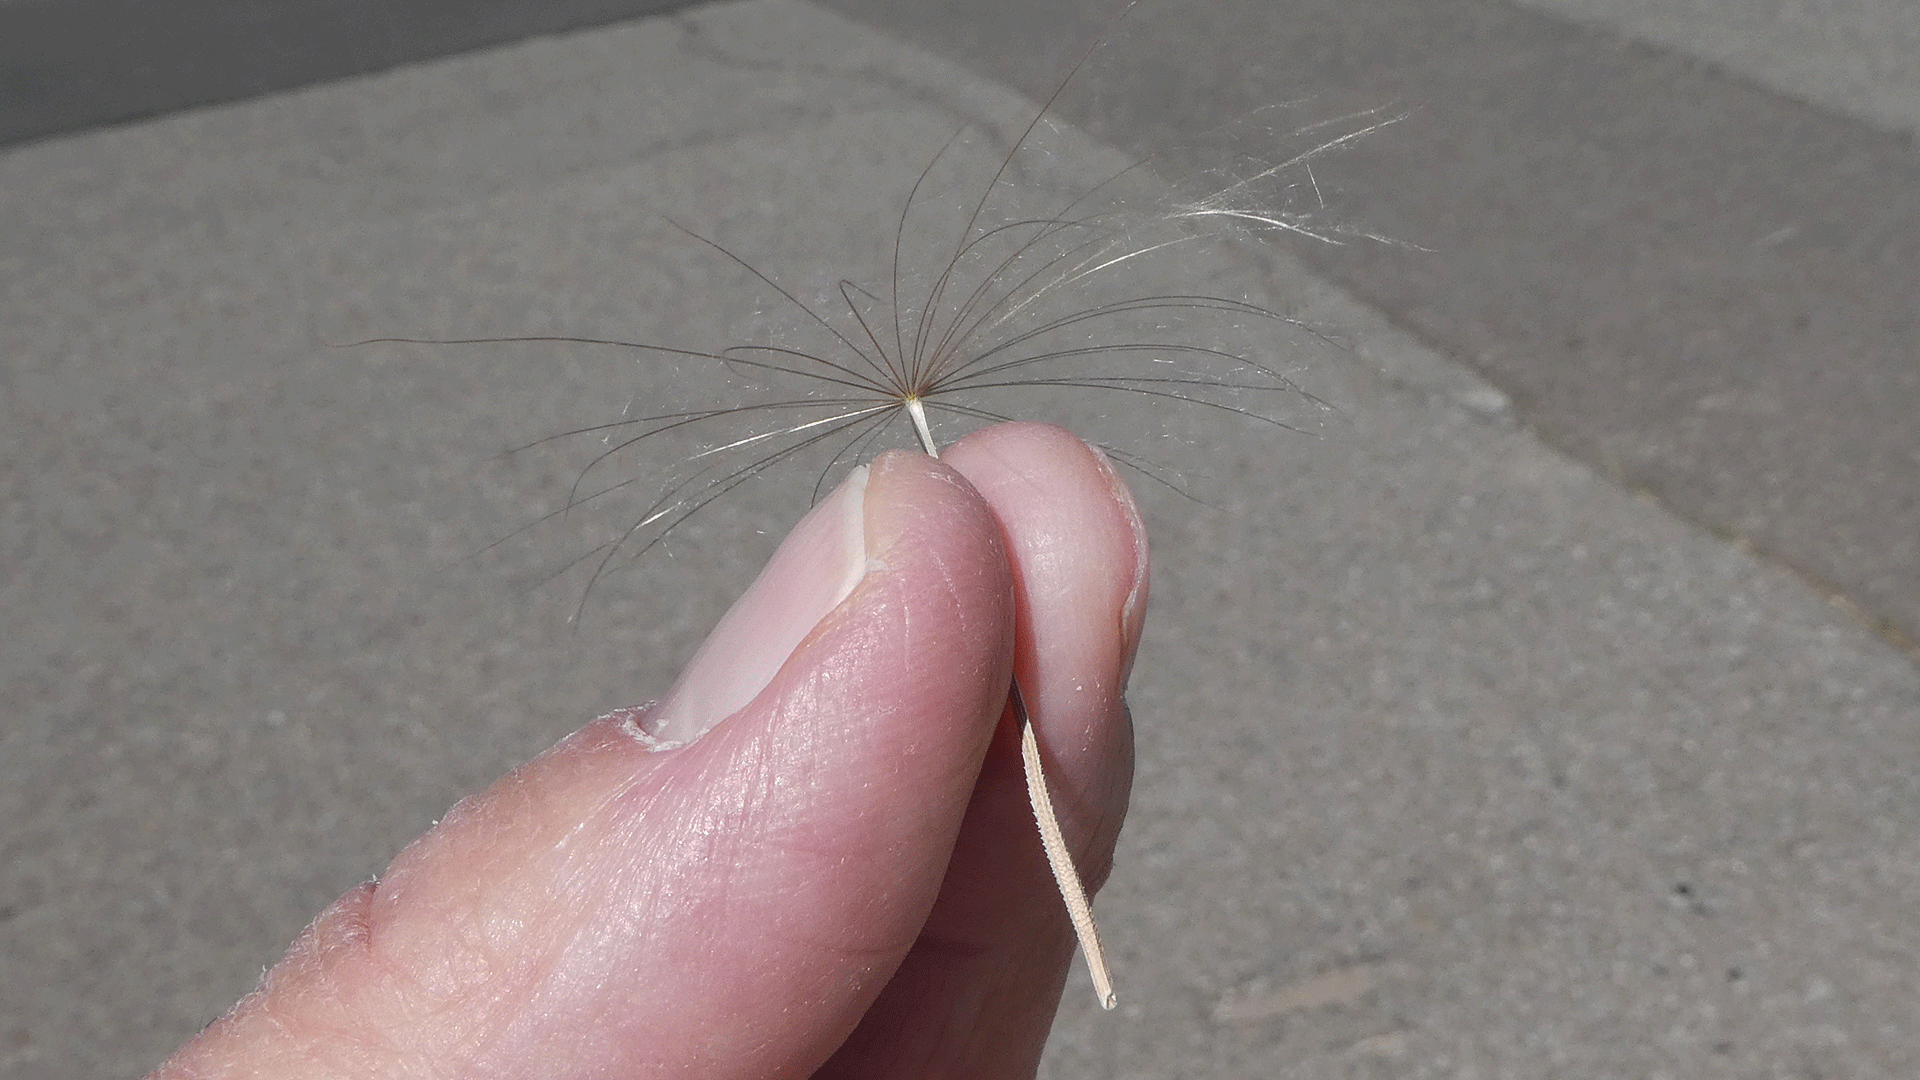 Seed plume, Albuquerque, May 2020